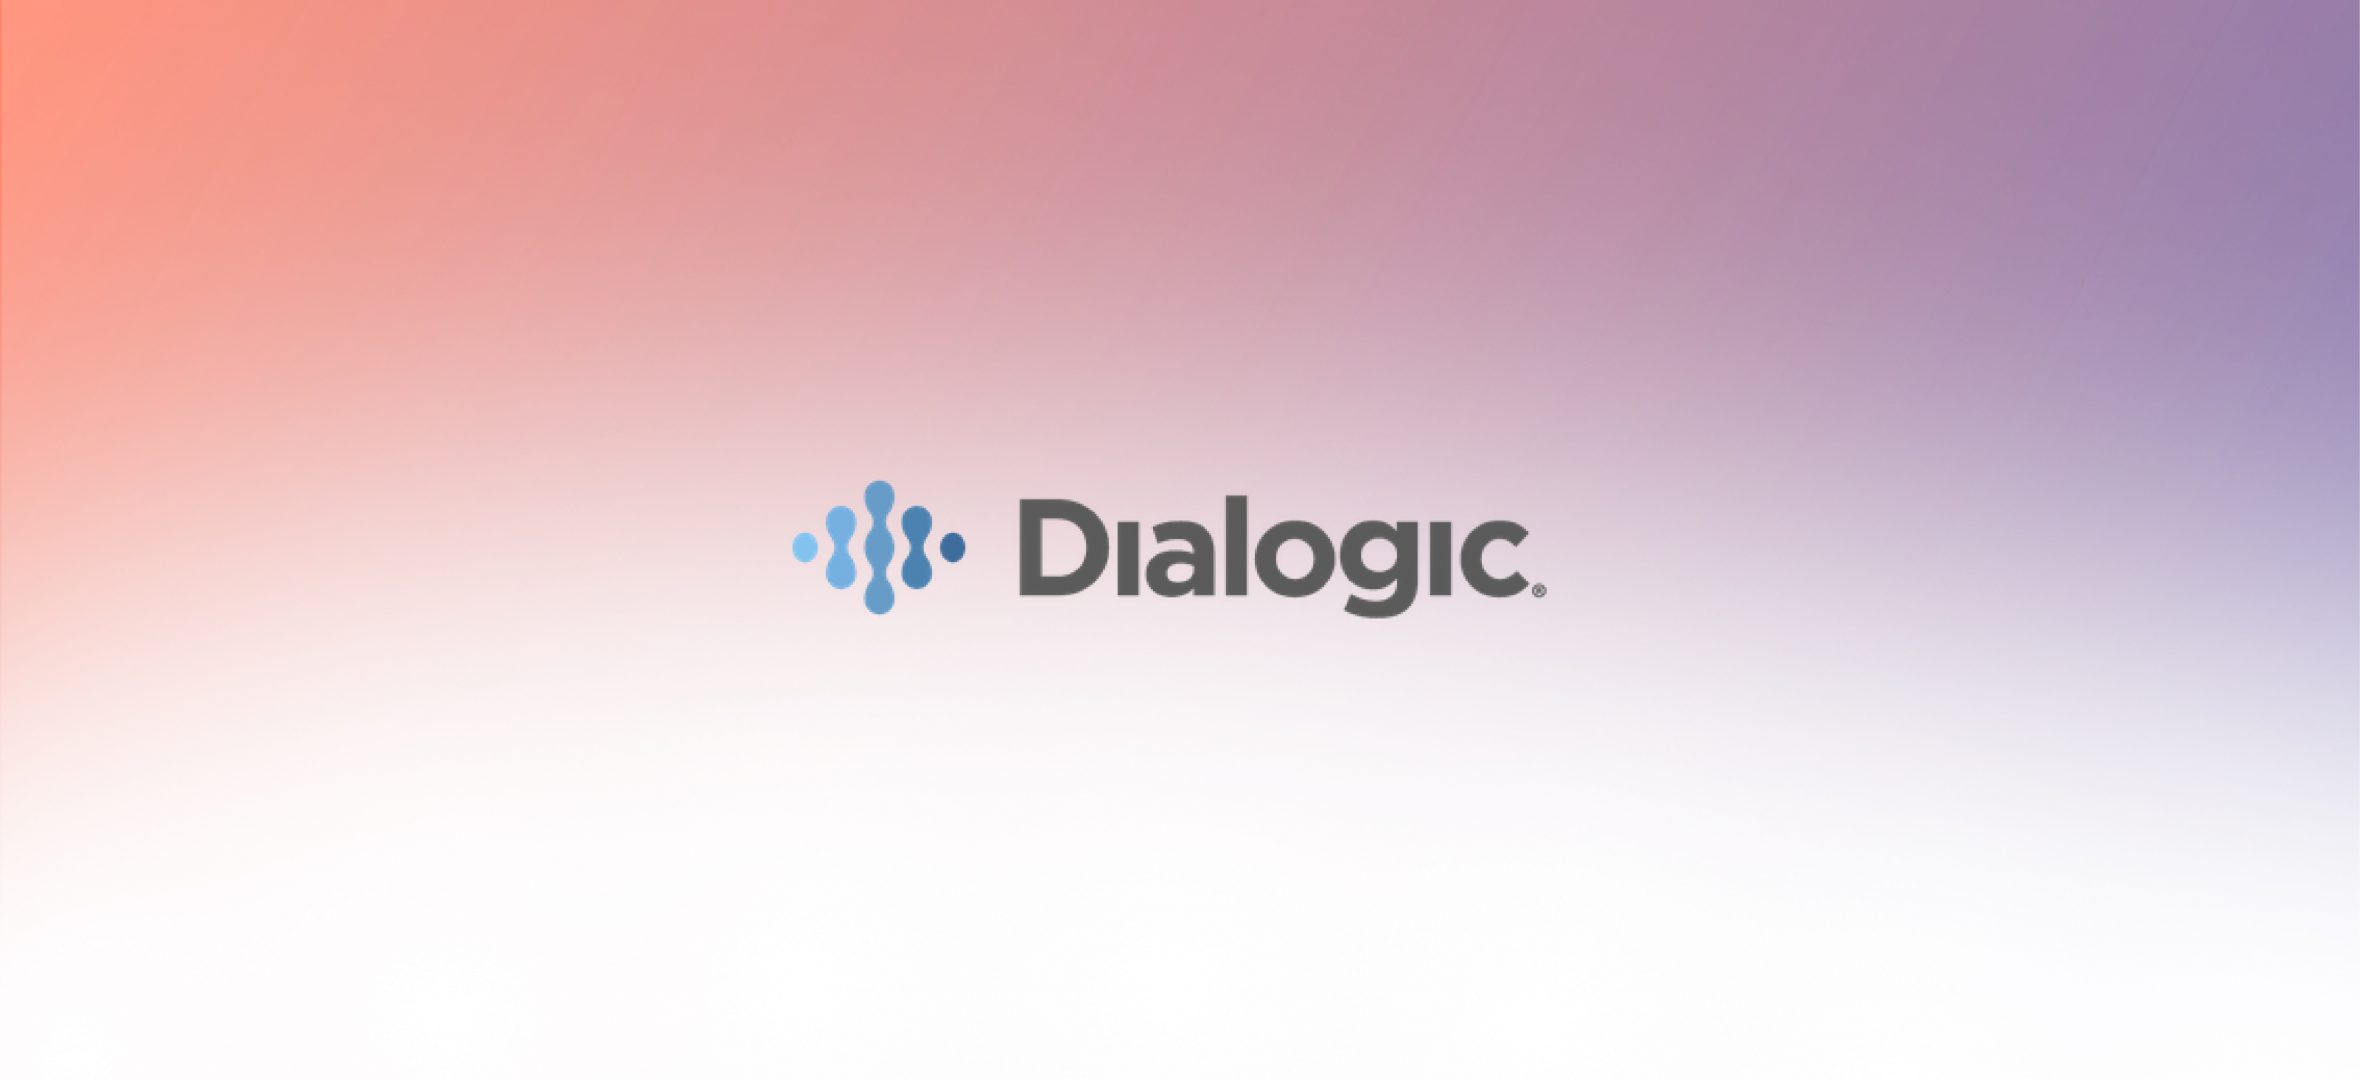 Epsilon Chooses Dialogic to Support Growing Global Interconnect Fabric